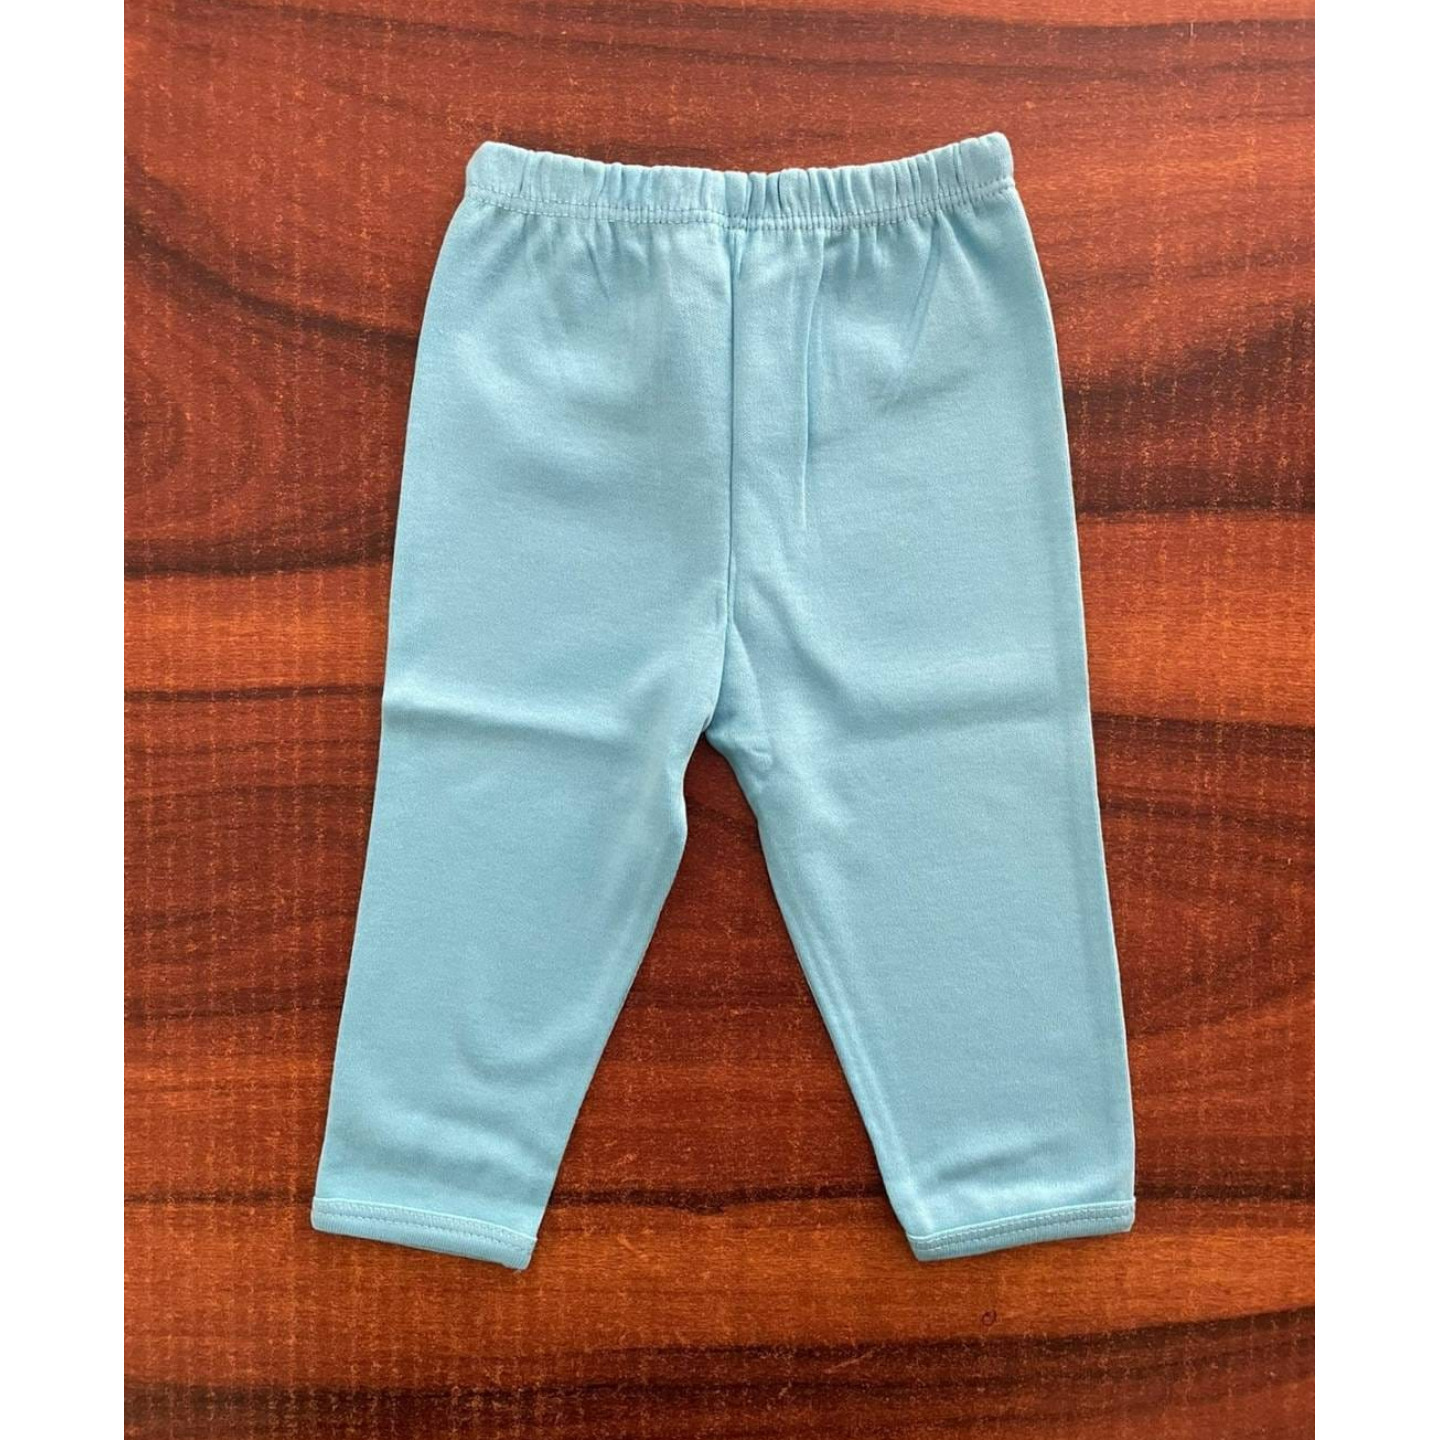 Cradle Togs Leggings Rs 165 Only 3 to 6 Months Size NewBorn baby Infant